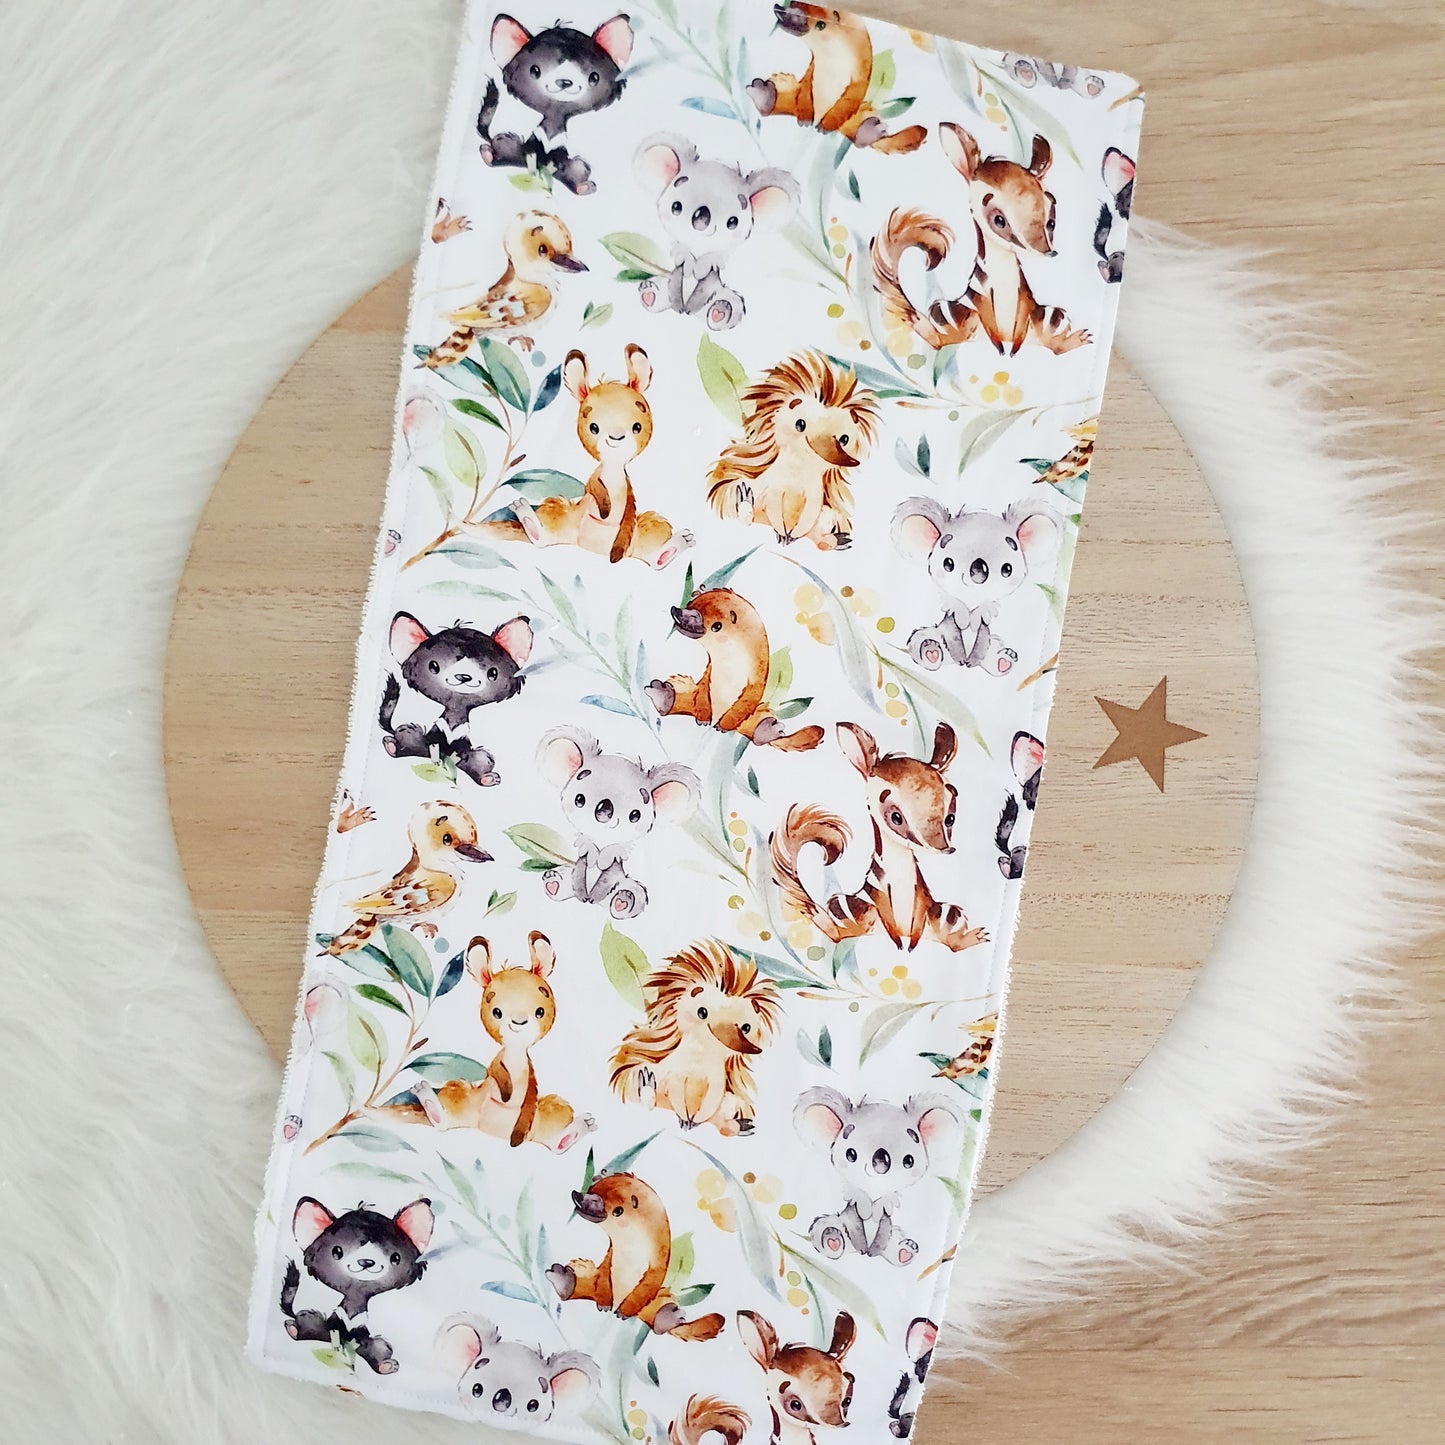 Burp Cloth | Baby Burp Cloths | Baby Shower Gift | Bamboo Backed Ultra Absorbent Towelling - AUSSIE ANIMALS